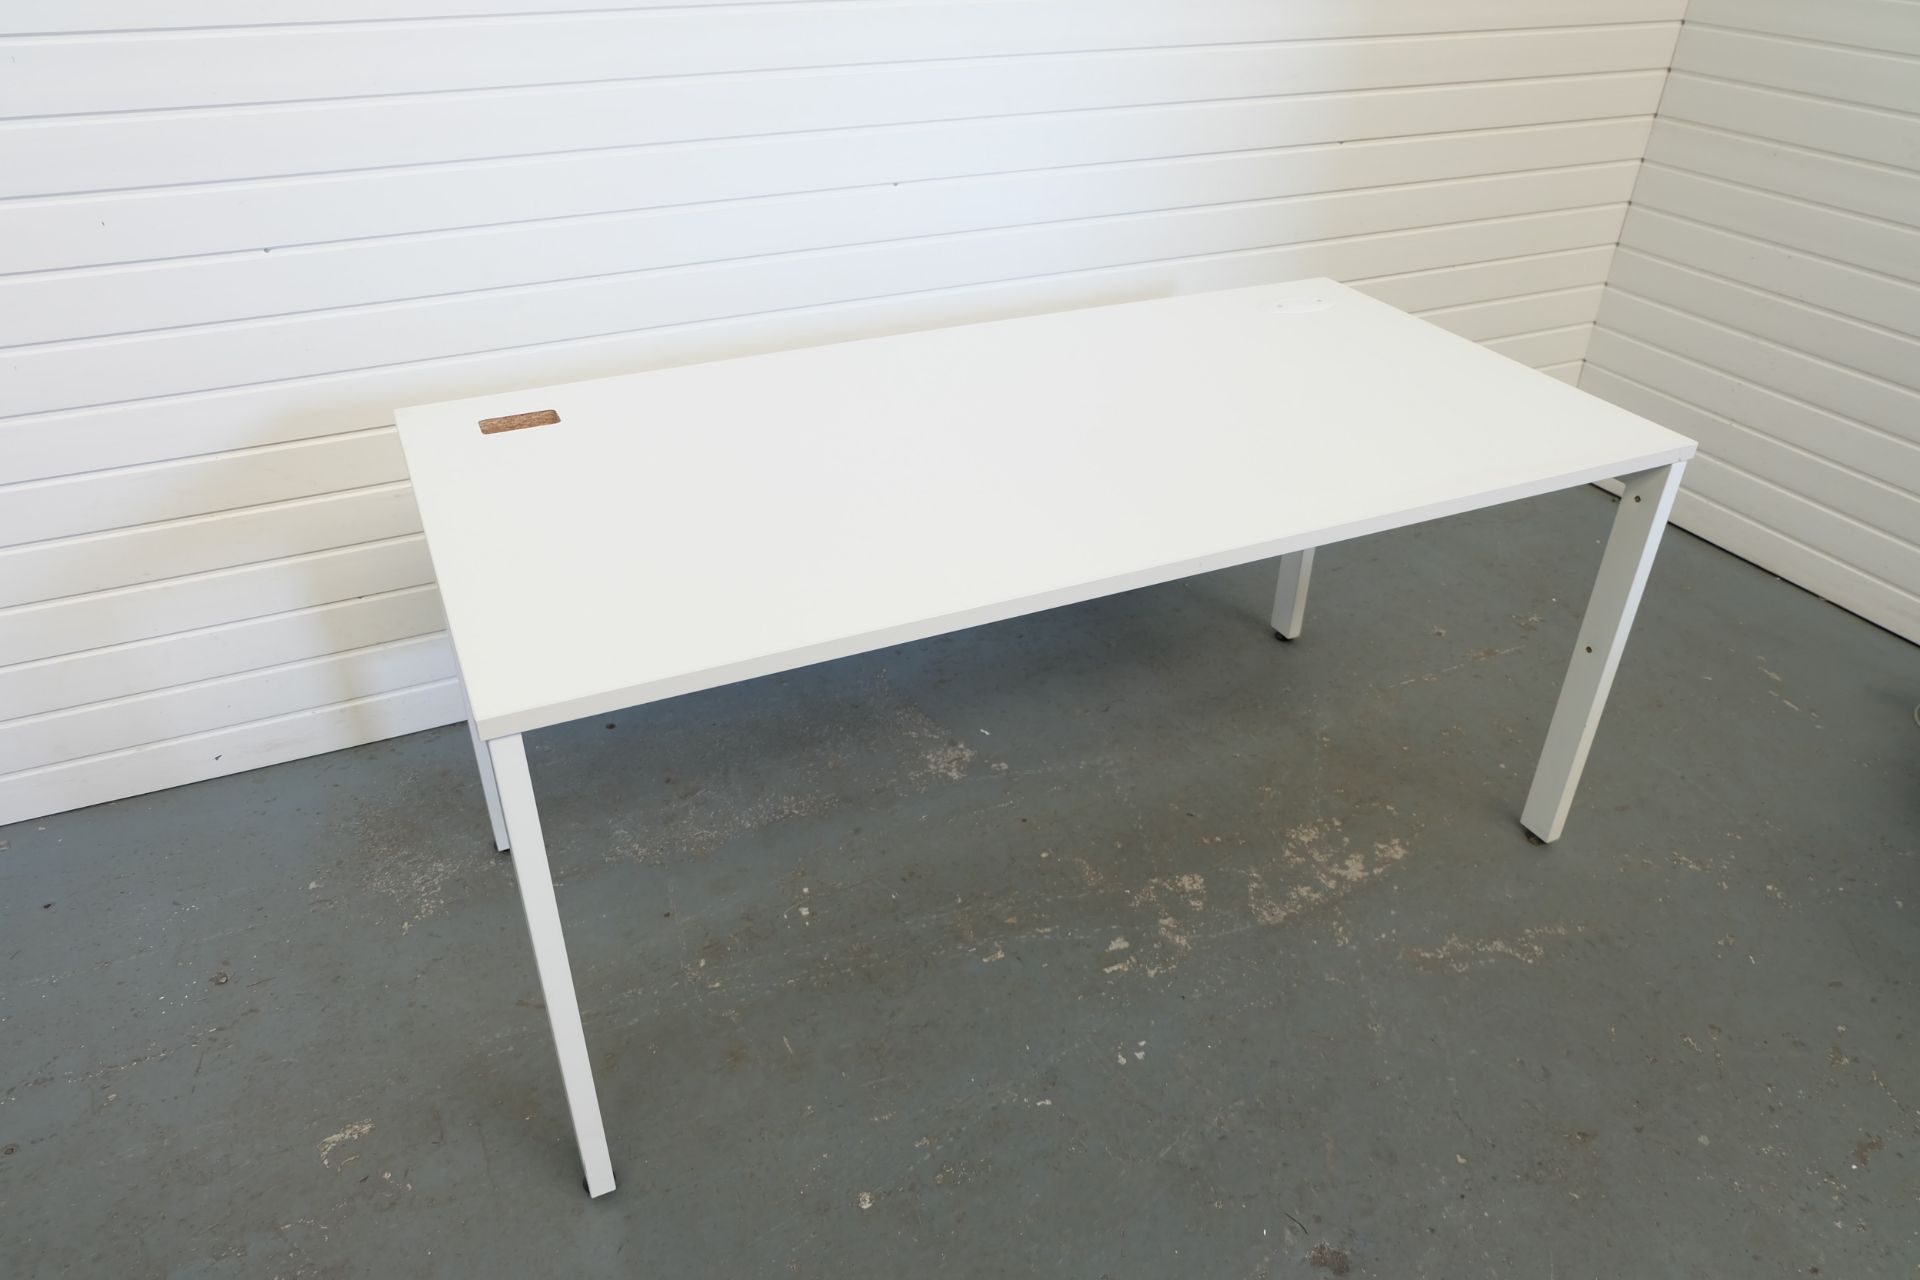 White Desk With Metal Legs and Adjustable Feet. 2 x Holes for Wires. Size 1600mm x 800mm x 730mm Hig - Bild 2 aus 4